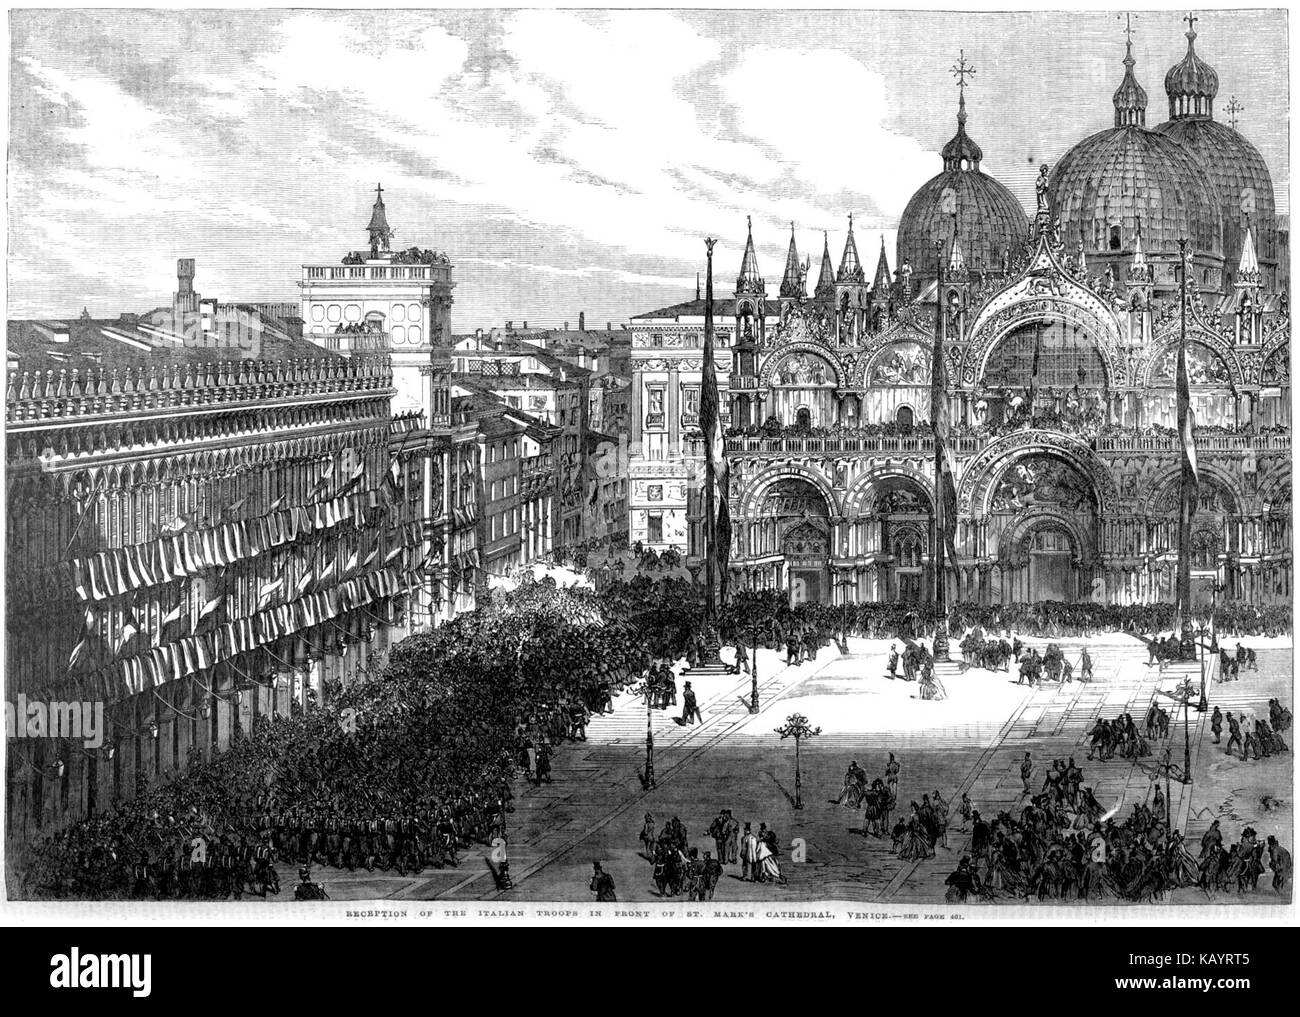 The Illustrated London News 1866   Truppe italiane in piazza San Marco 19 ottobre Stock Photo